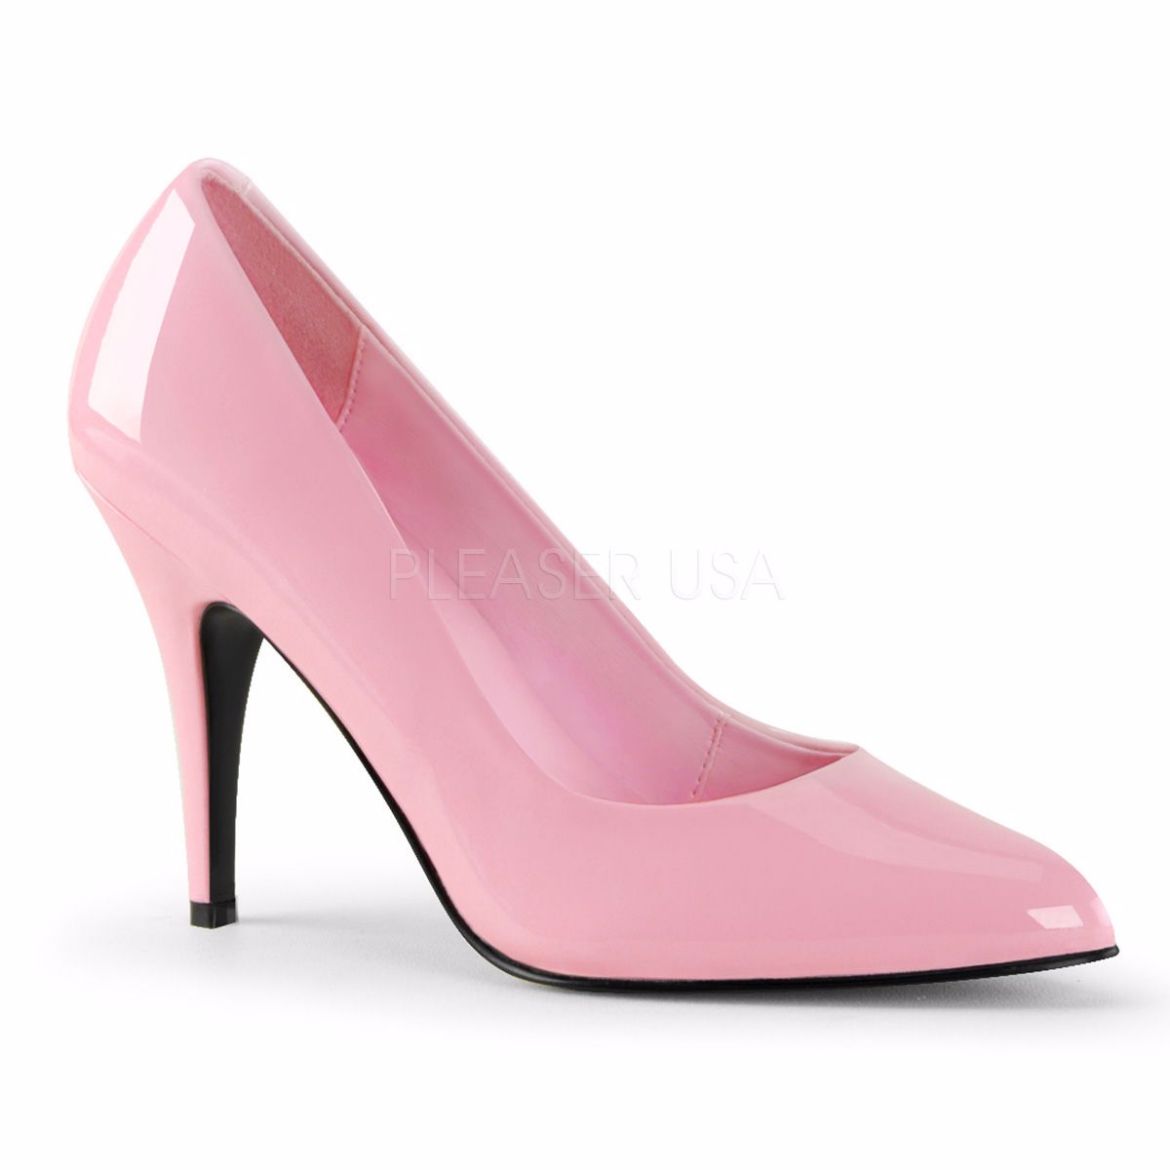 Product image of Pleaser Vanity-420 Baby Pink Patent, 4 inch (10.2 cm) Heel Court Pump Shoes